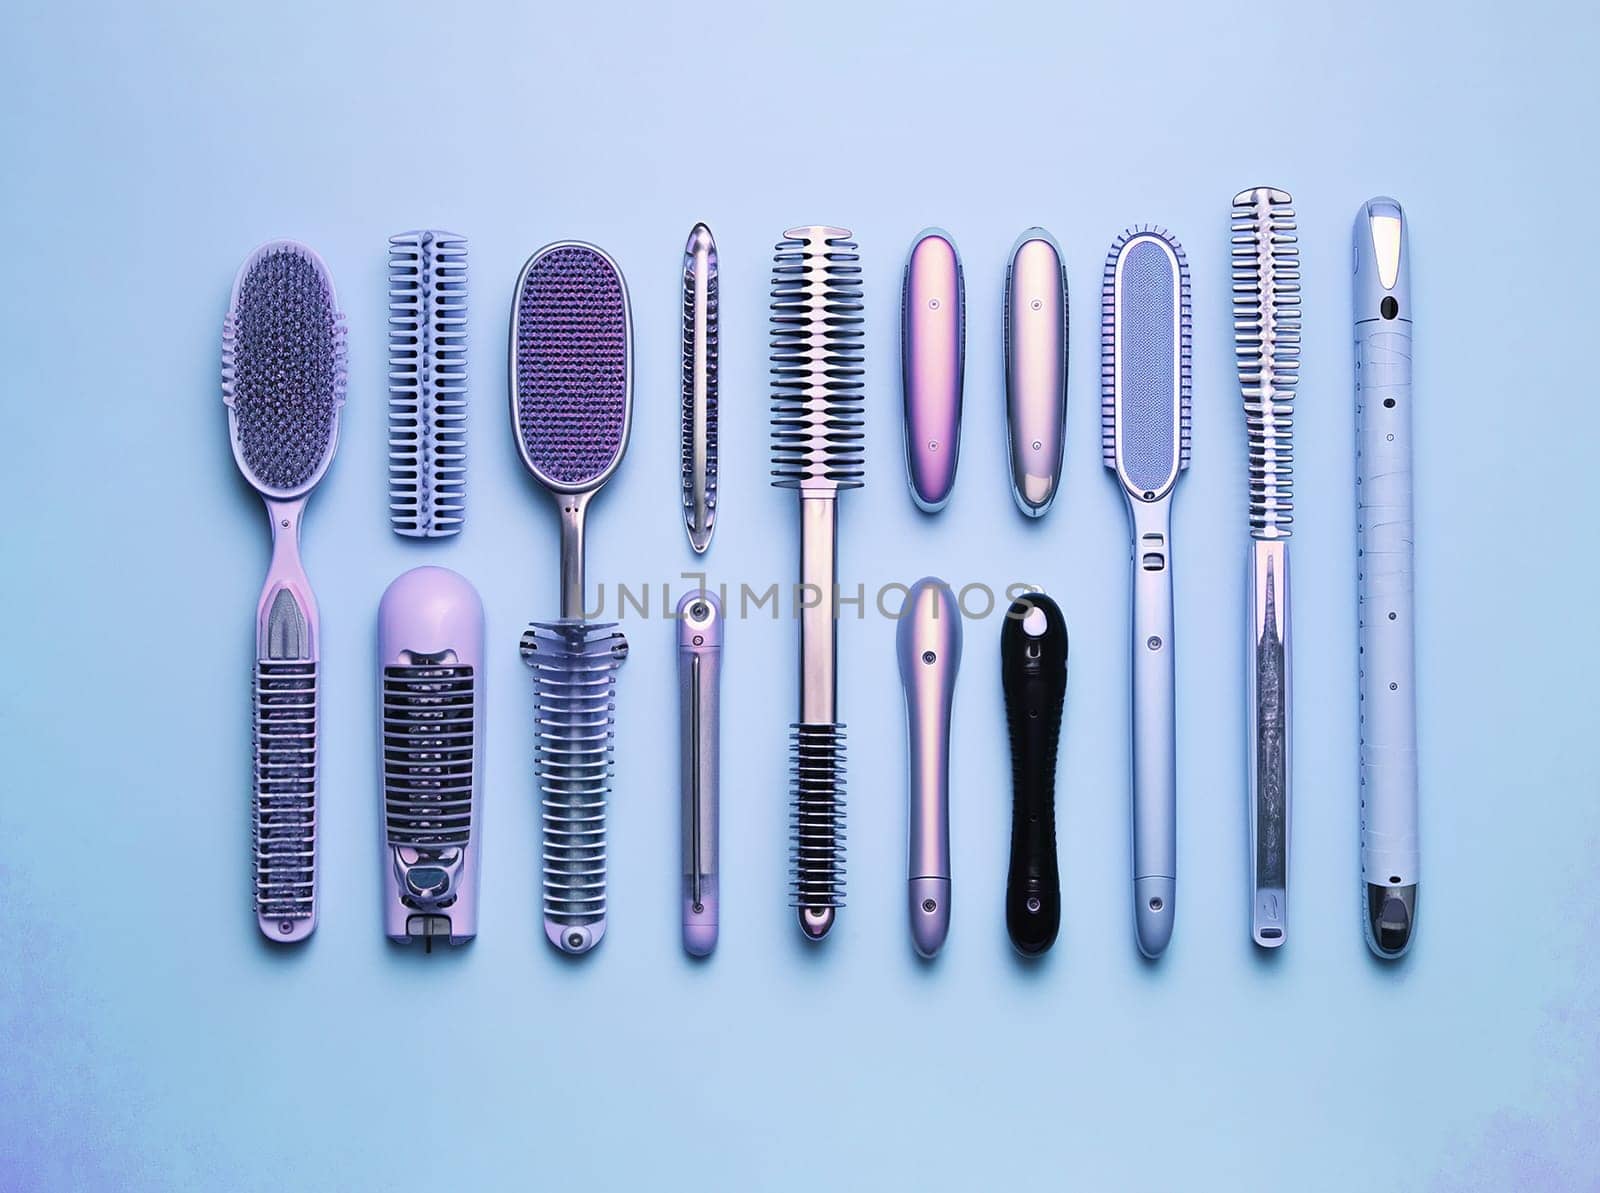 women's beauty devices on a blue background, hairdresser's tools by Suietska